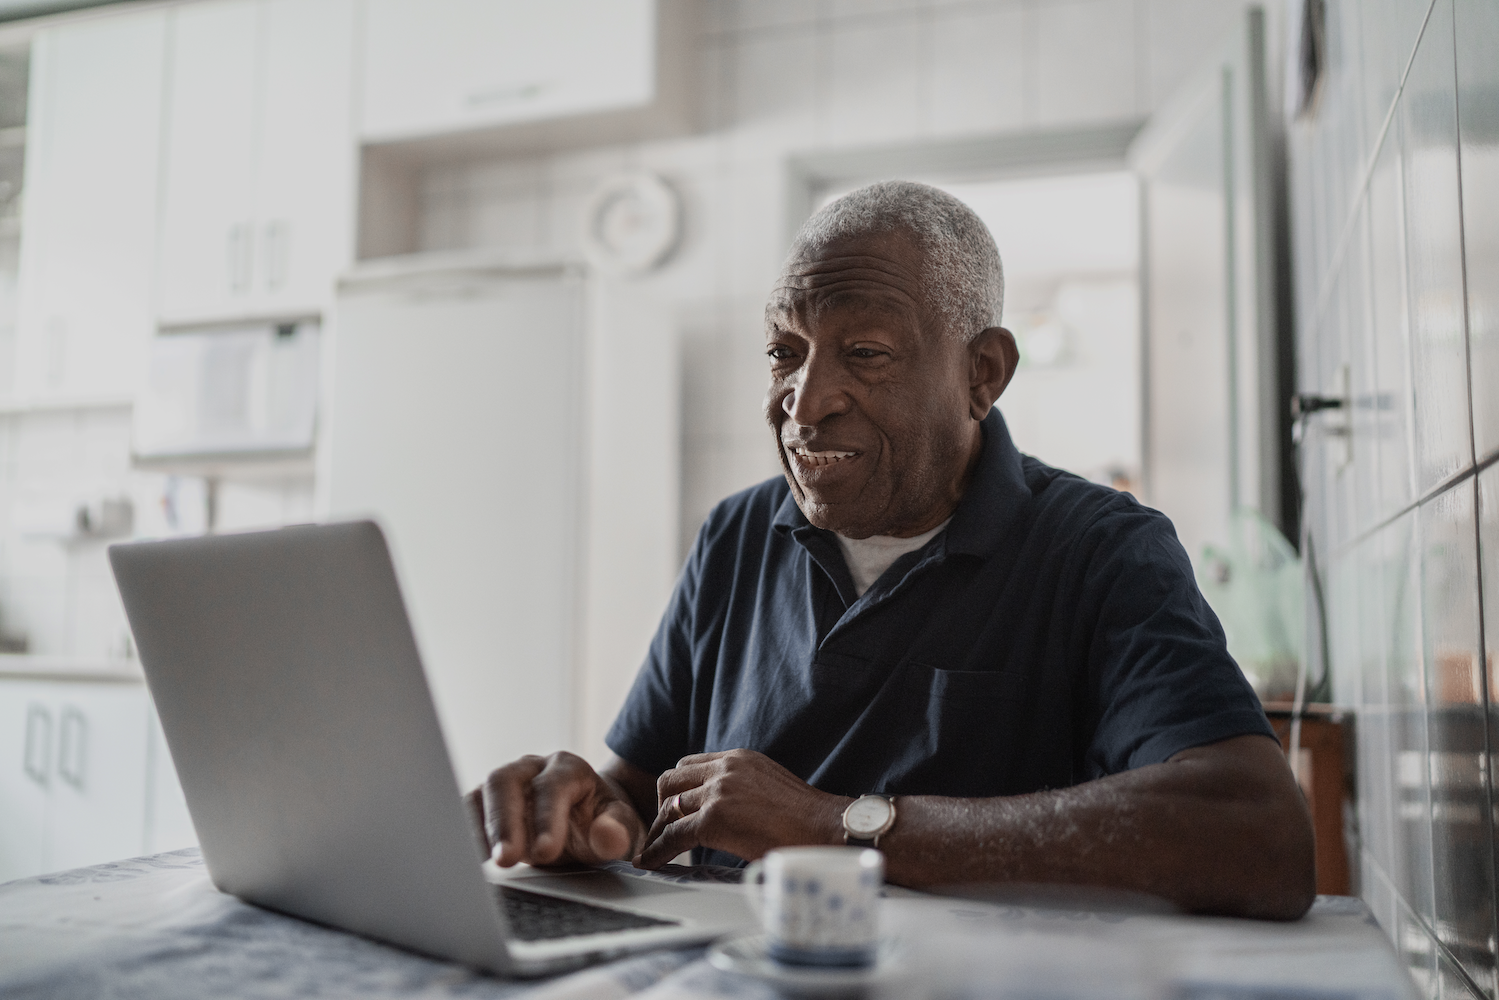 Elderly man sitting at a kitchen table, smiling and looking at an open laptop